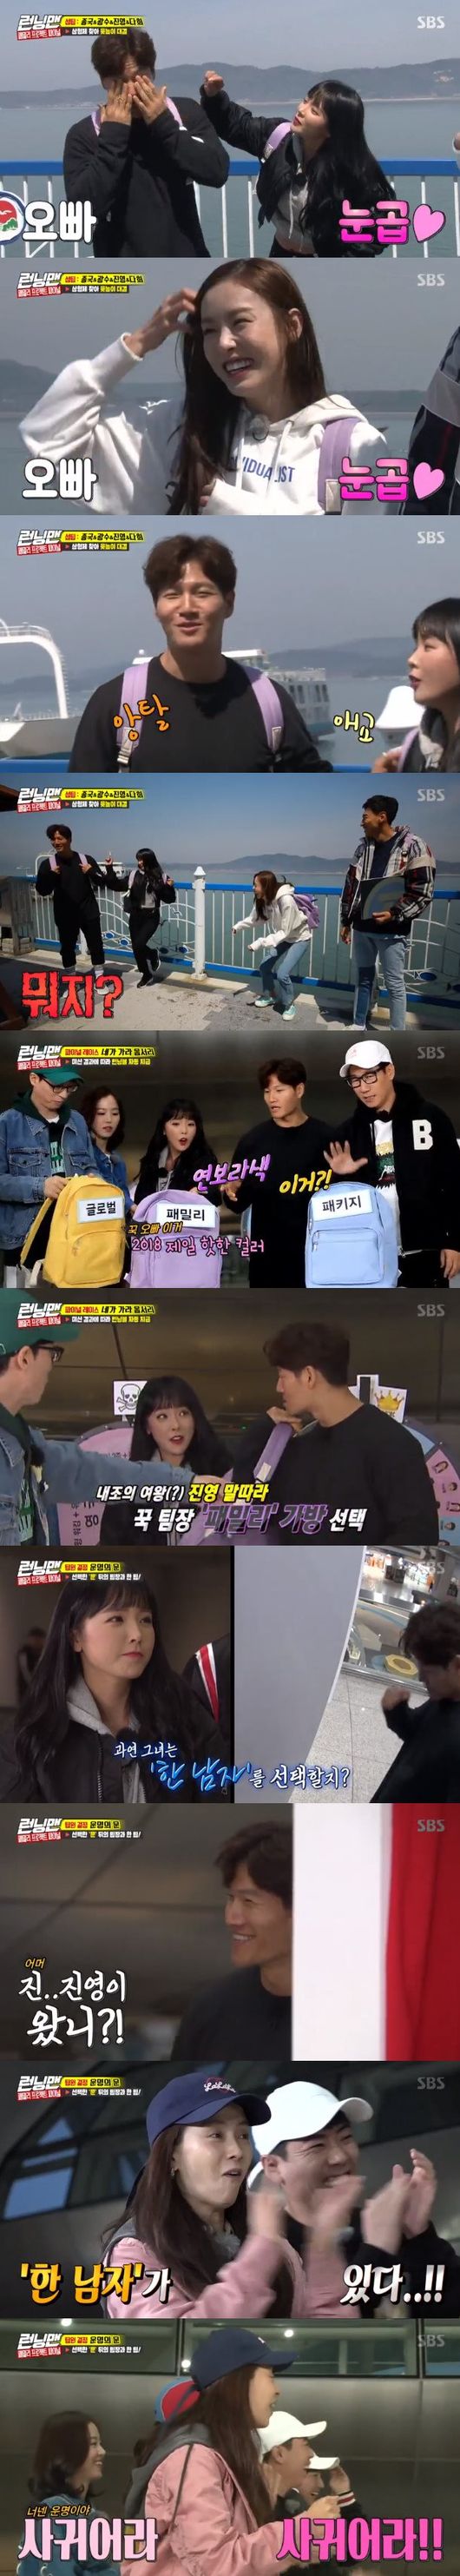 Running Man Kim Jong-kook and Hong Jin-young showed off their extraordinary couple Chemistry. In the Family Project Final of SBS entertainment Running Man broadcasted on the 6th, the members who are conducting You Go to Body Surprise Cook, Ji Suk-jin each took the team leader and picked a backpack.First, Yoo Jae-Suk chose yellow global, Kim Jong-kook chose light purple family, Ji Suk-jin chose light blue package, and Yoo Jae-Suk was assigned Hong Kong, Kim Jong-kook was island, and Ji Suk-jin was assigned inland, especially during this process. On the advice of Hong Jin-young, who says It is the hottest color of 2018 next to him, he picked a light purple backpack and gathered his attention.In addition, Hong Jin-young joined Kim Jong-kook team again in team selection and received support from members of King of the Year. Eventually, Jeon So-min, Yang Se-chan, Kang Han-na joined the Yoo Jae-Suk team, Lee Kwang-soo, Hong Jin-young, Lee Da-hee joined the Kim Jong-kook team Haha, Song Ji-hyo and Lee Sang-yeop entered the Ji Suk-jin team, and they were given the permission to receive the restaurant waiting number 1001, win the Mona road in the confrontation with the three brothers, and take the longest straw line in Korea in Hadong.First, Kim Jong-kook, Hong Jin-young, Lee Kwang-soo and Lee Da-hee were drawn to the island on a boat, and they exchanged words such as I have dressed like a couple and I am like a real couple and laughed at each other. The person who received the lowest score received a penalty for the yun, causing a laugh.The two duos breathing of the entertainment show showed synergy.Above all, Kim Jong-kook and Hong Jin-young, who are showing a unique presence in a sweet and sometimes bloody atmosphere, have made them expect to see their future activities./ Running Man screen capture